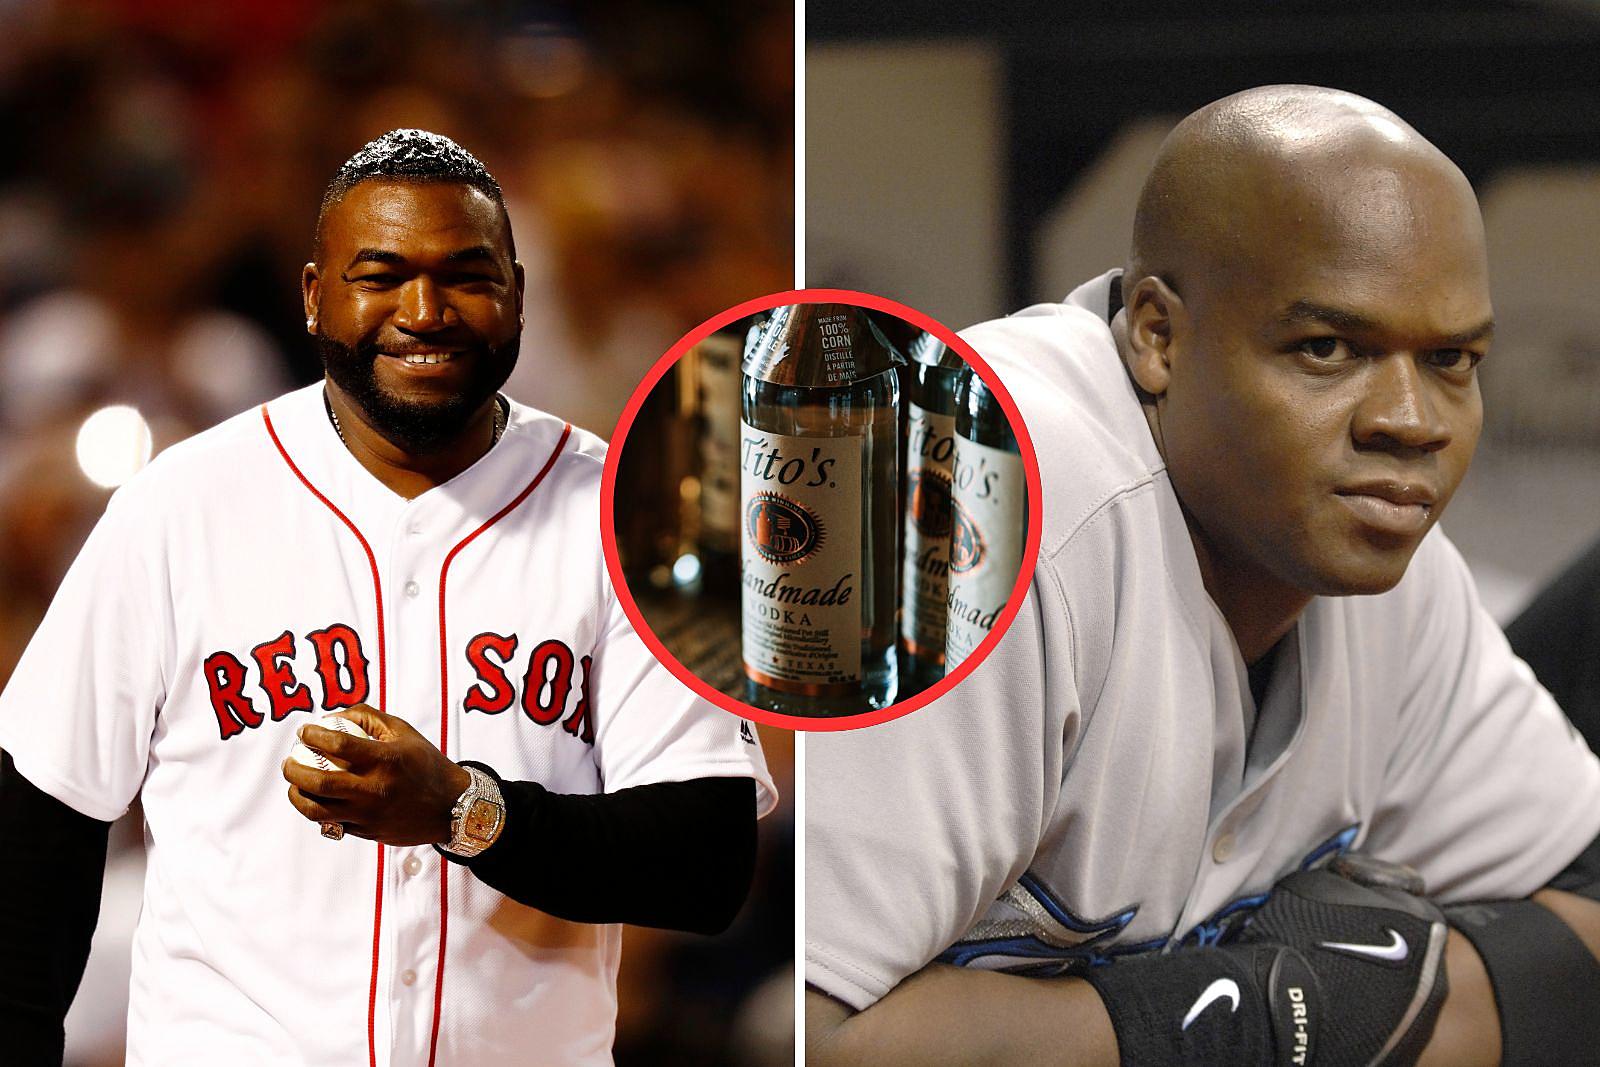 Big Papi Prankster: The Time Red Sox' David Ortiz Spiked Water